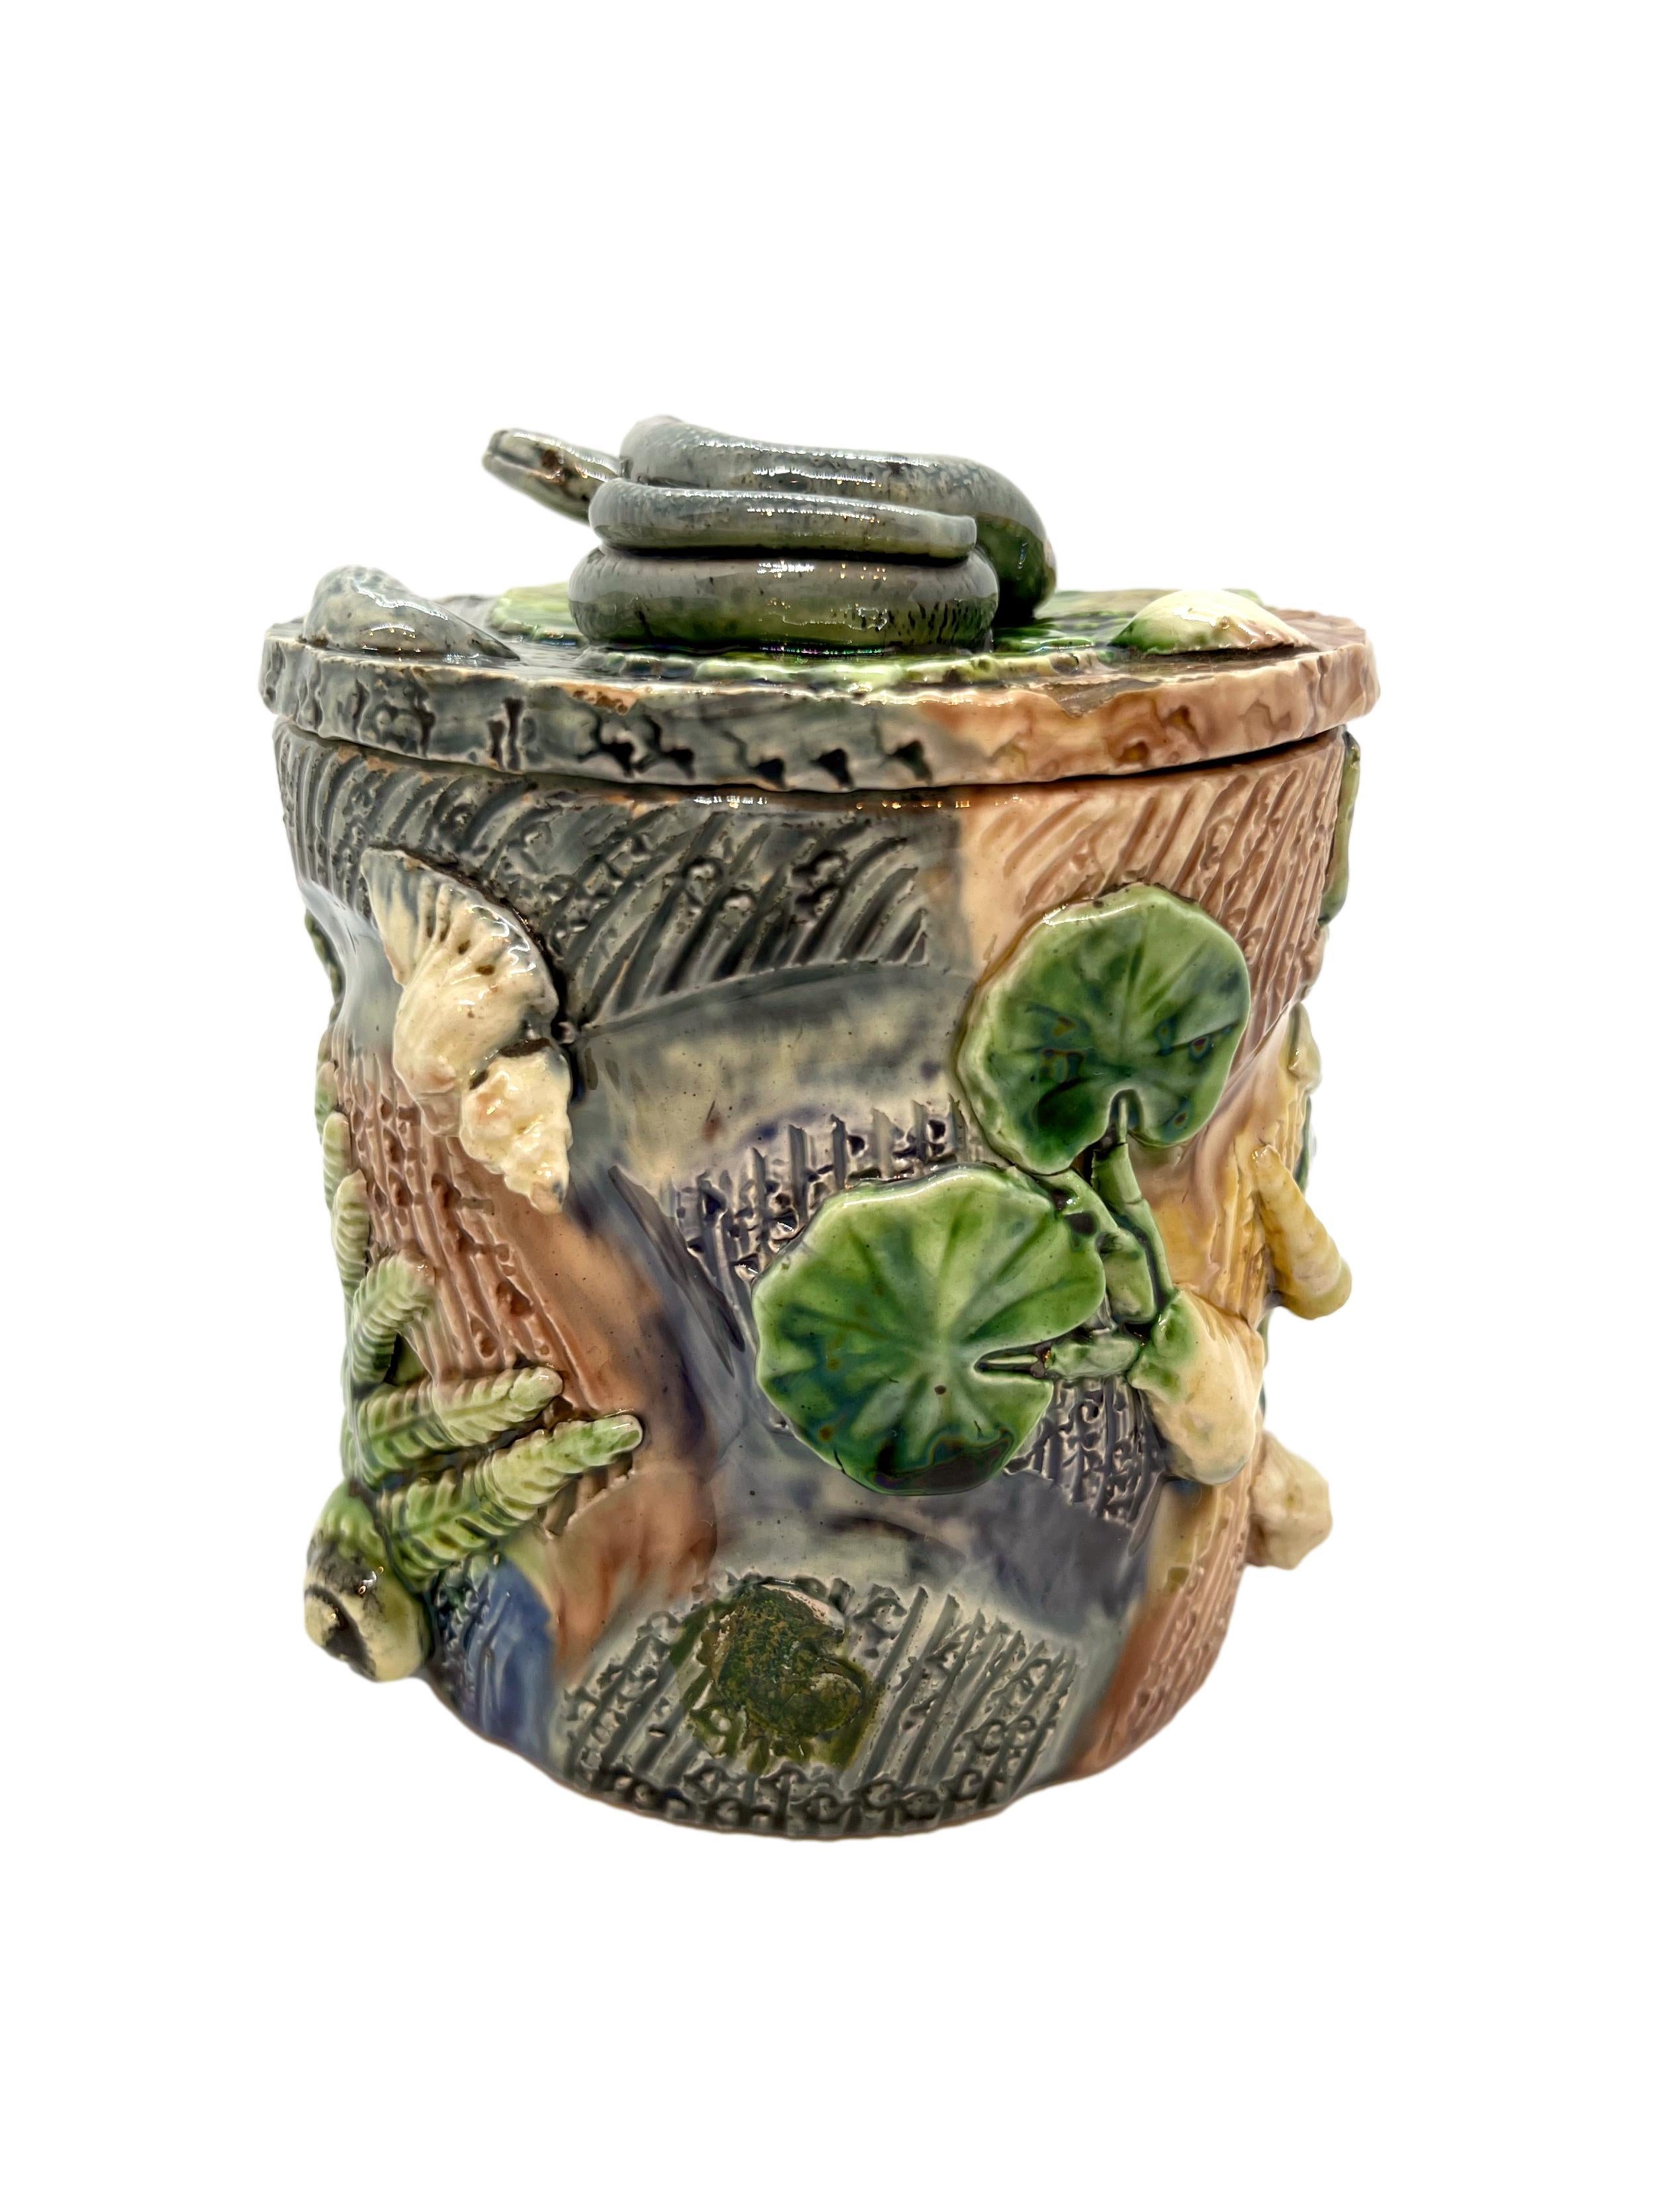 Victorian Thomas Sergent Majolica Palissy Ware Humidor with Coiled Snake on Lid, ca, 1880 